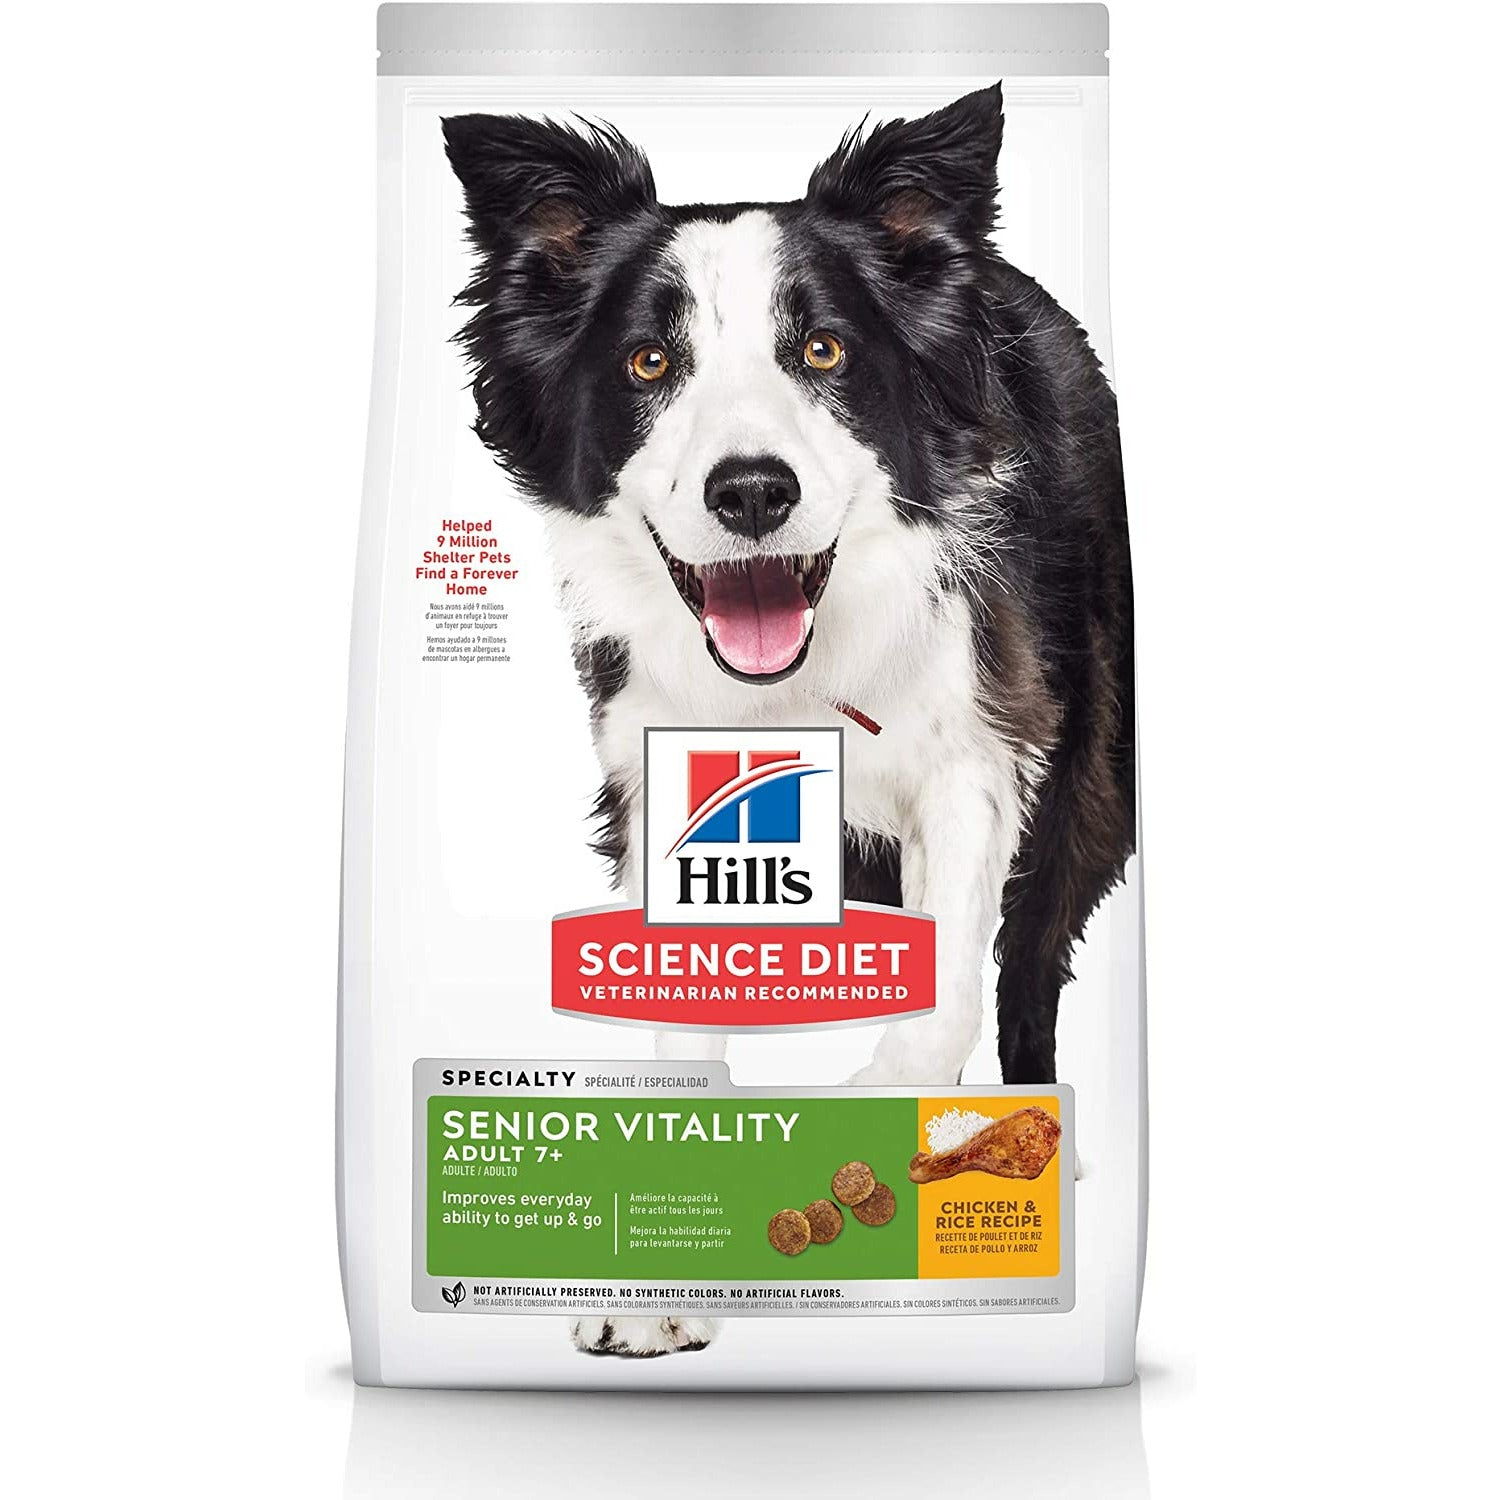 Hill's Science Diet Dry Dog Food, Adult 7+, Senior Vitality, Chicken & Rice Recipe  Dog Food  | PetMax Canada